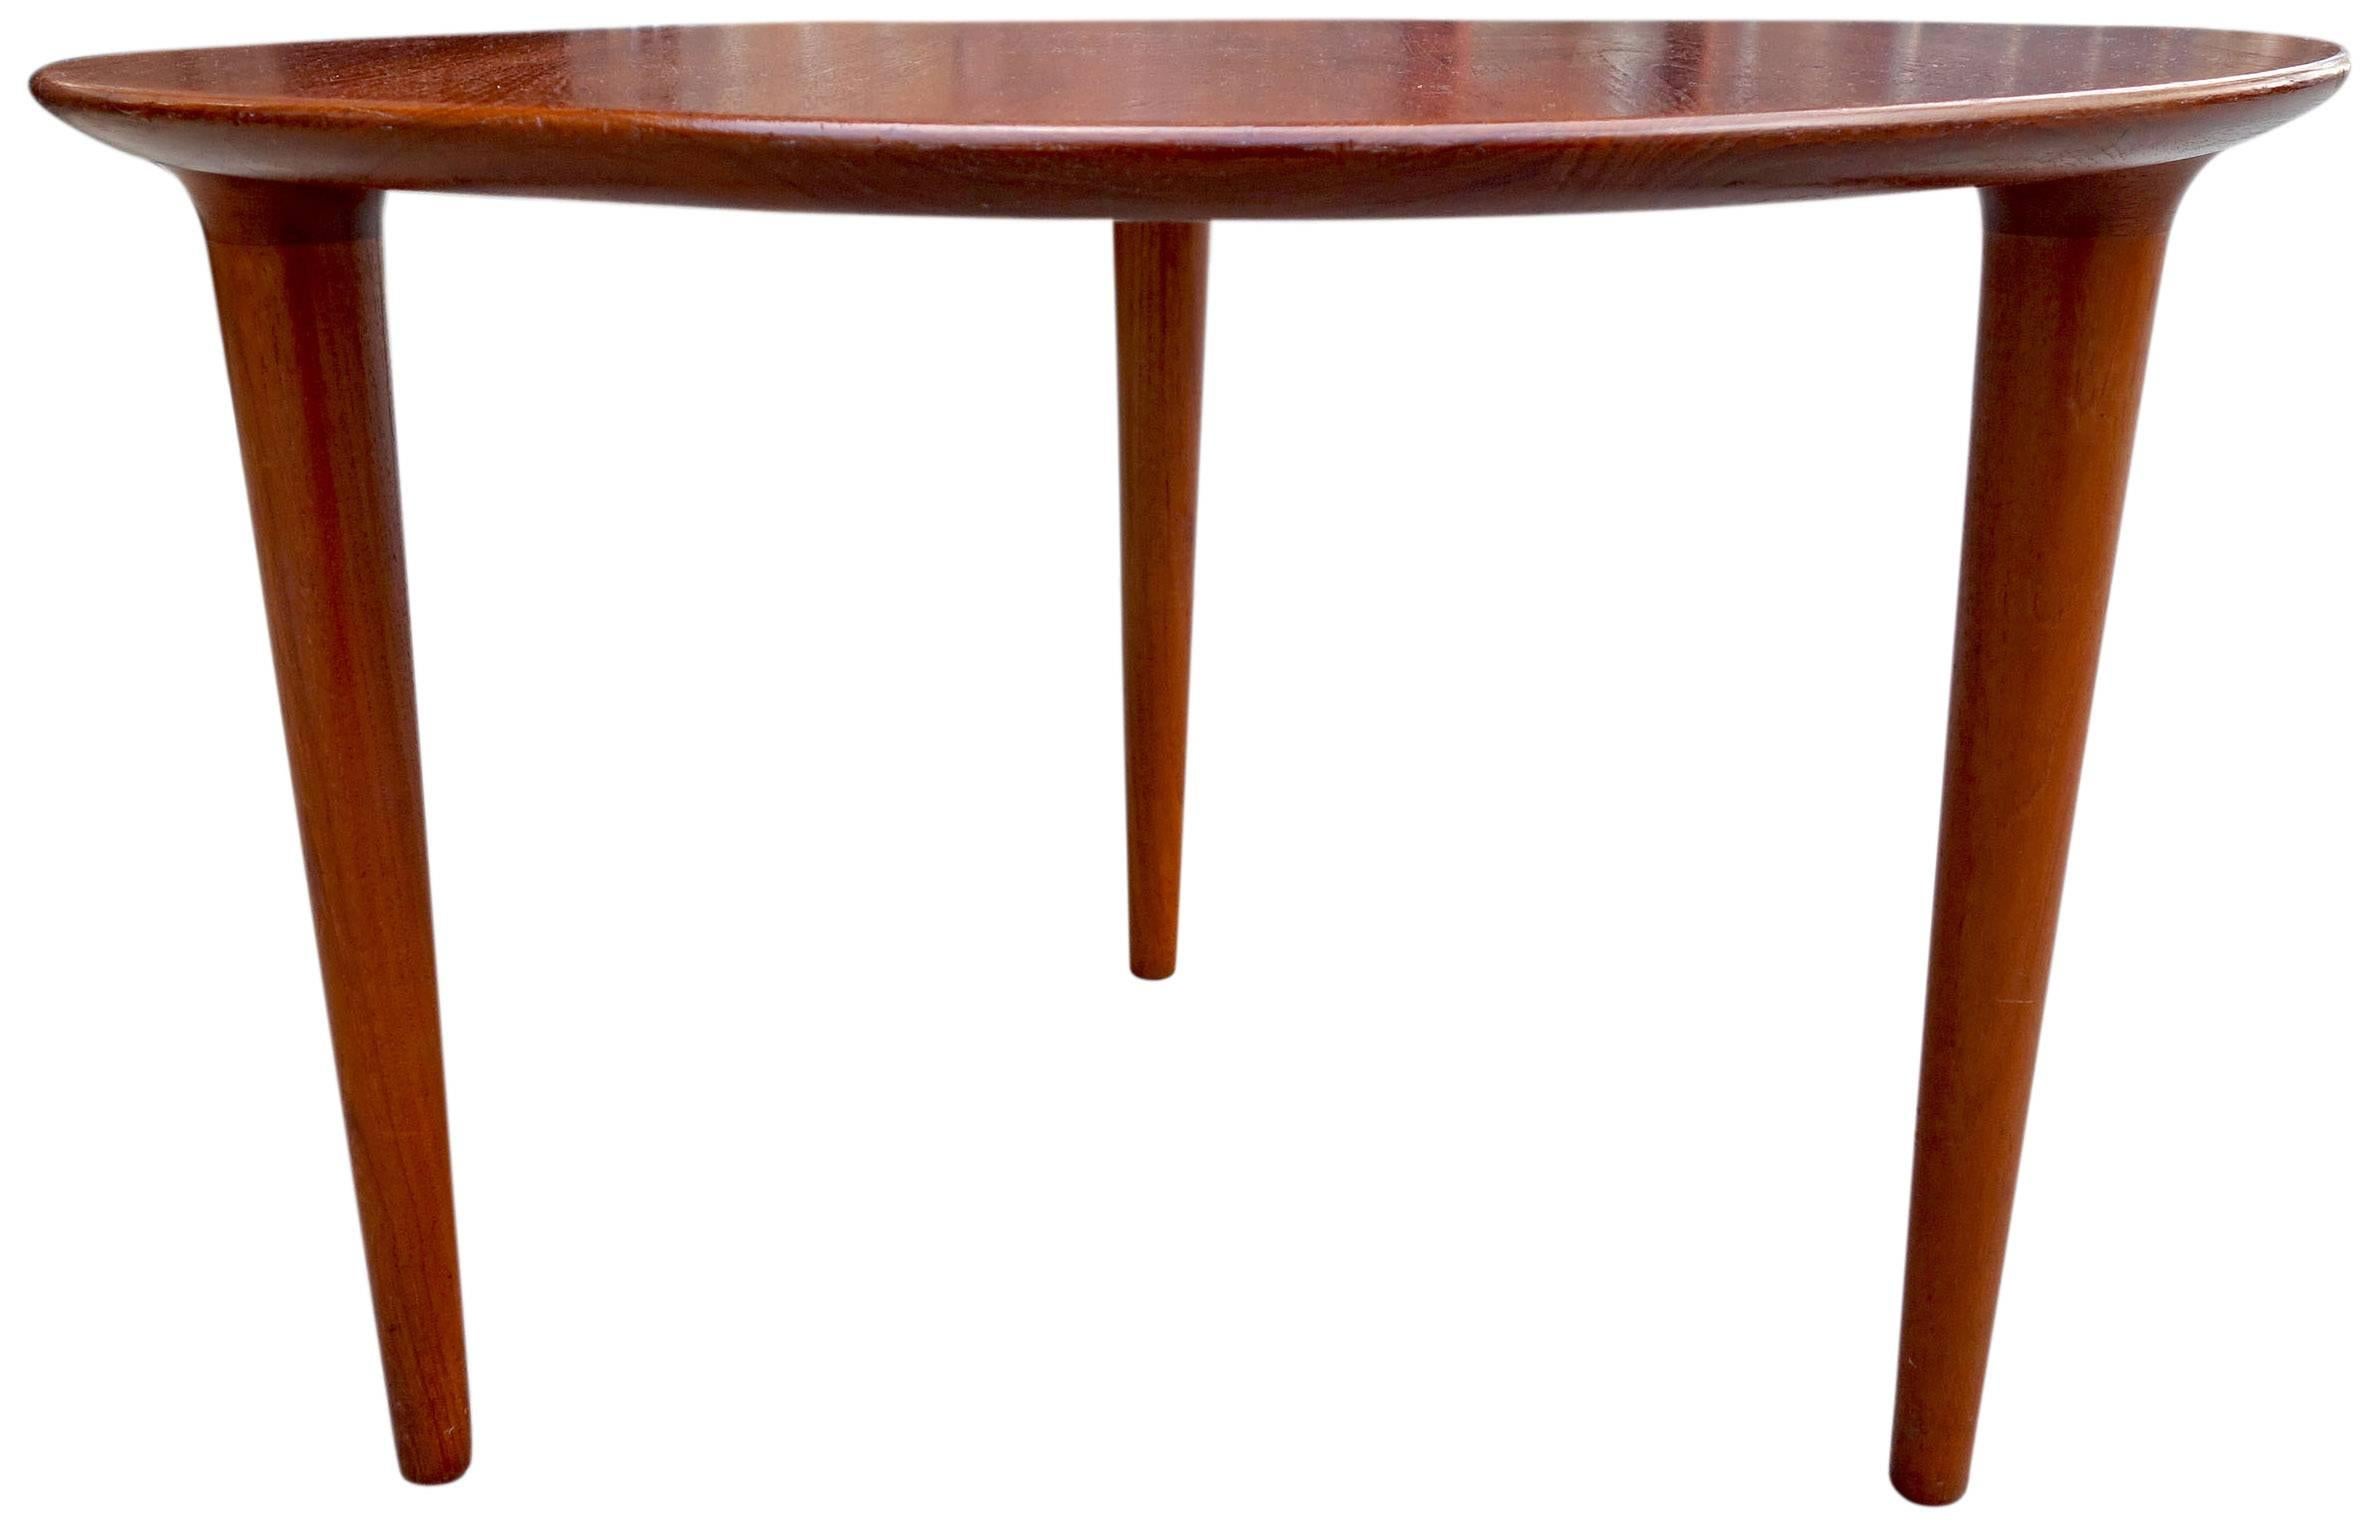 Elegant three legged round side or coffee table in solid teak. Showing minimal lines with reverse tulip tapered legs. Excellent proportions and craftsmanship make this table a must in any refined home. In original condition and ready for use.